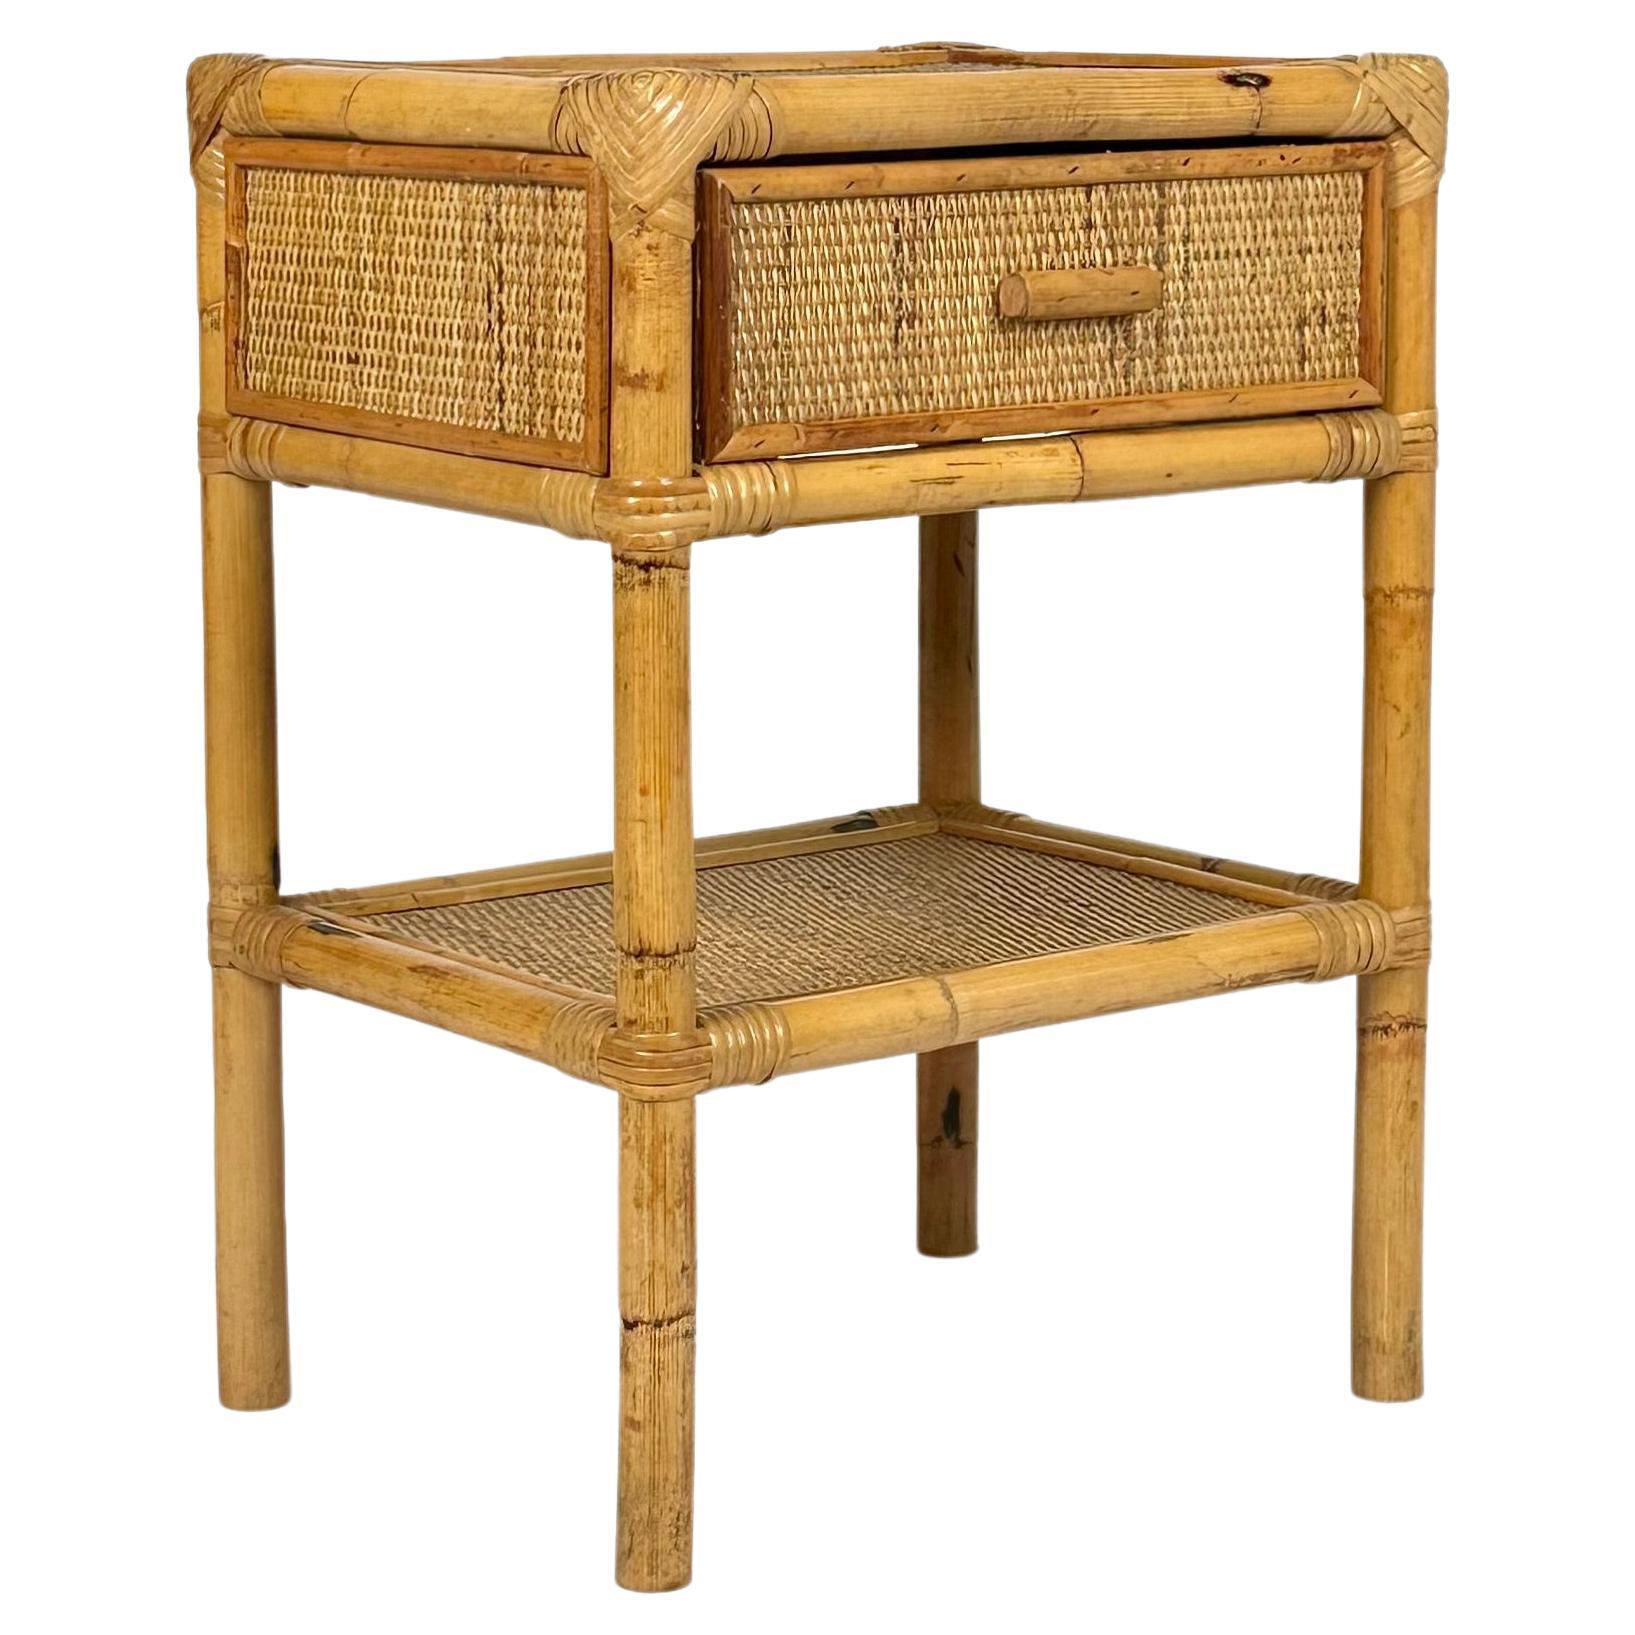 Late 20th Century Midcentury Bedside Table Nightstand in Bamboo & Rattan, Italy, 1970s For Sale